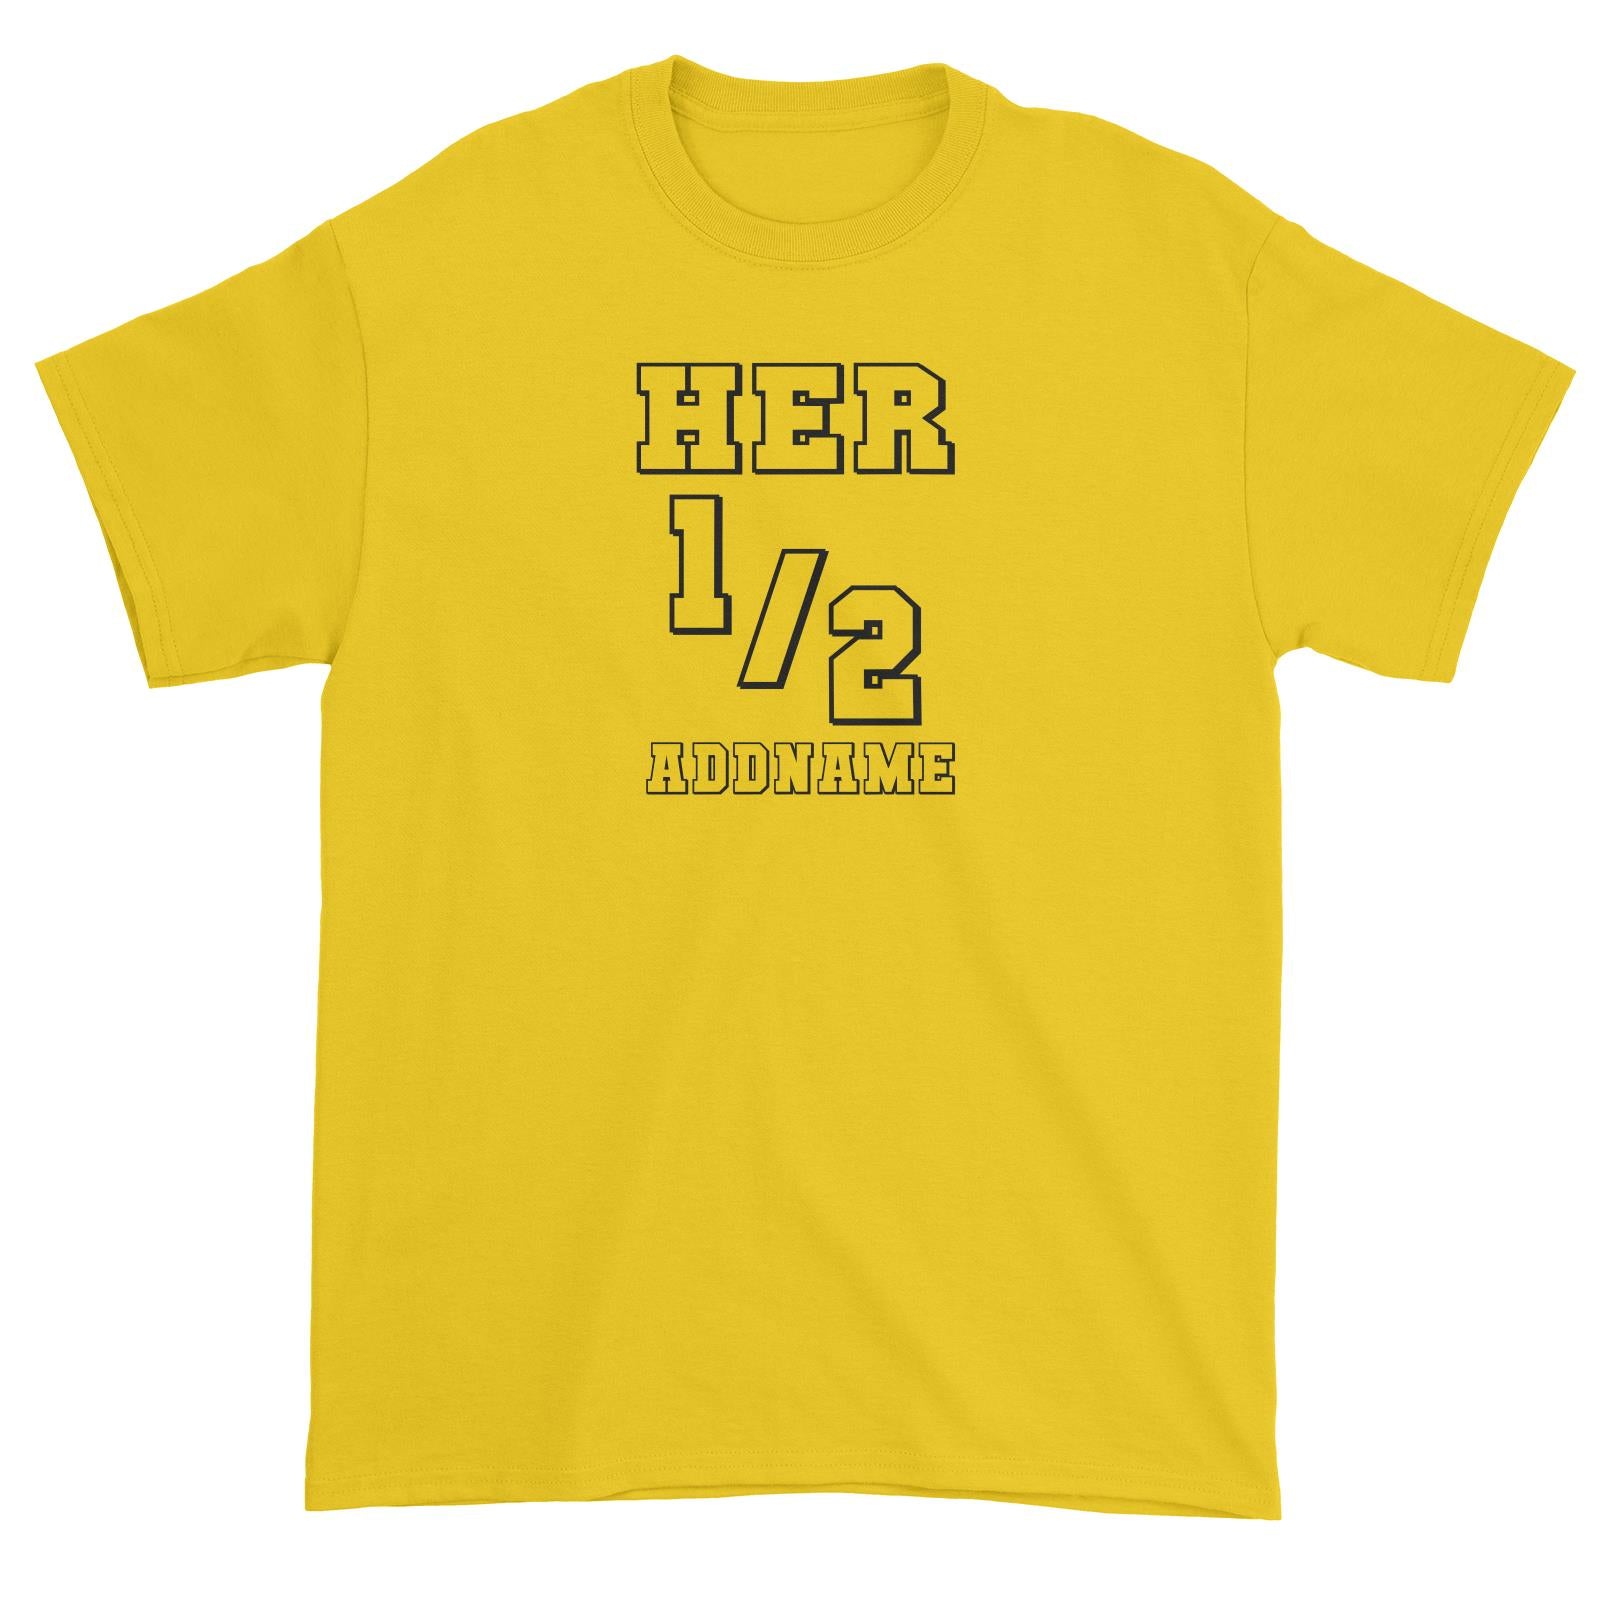 Couple Series Her Half Addname Unisex T-Shirt